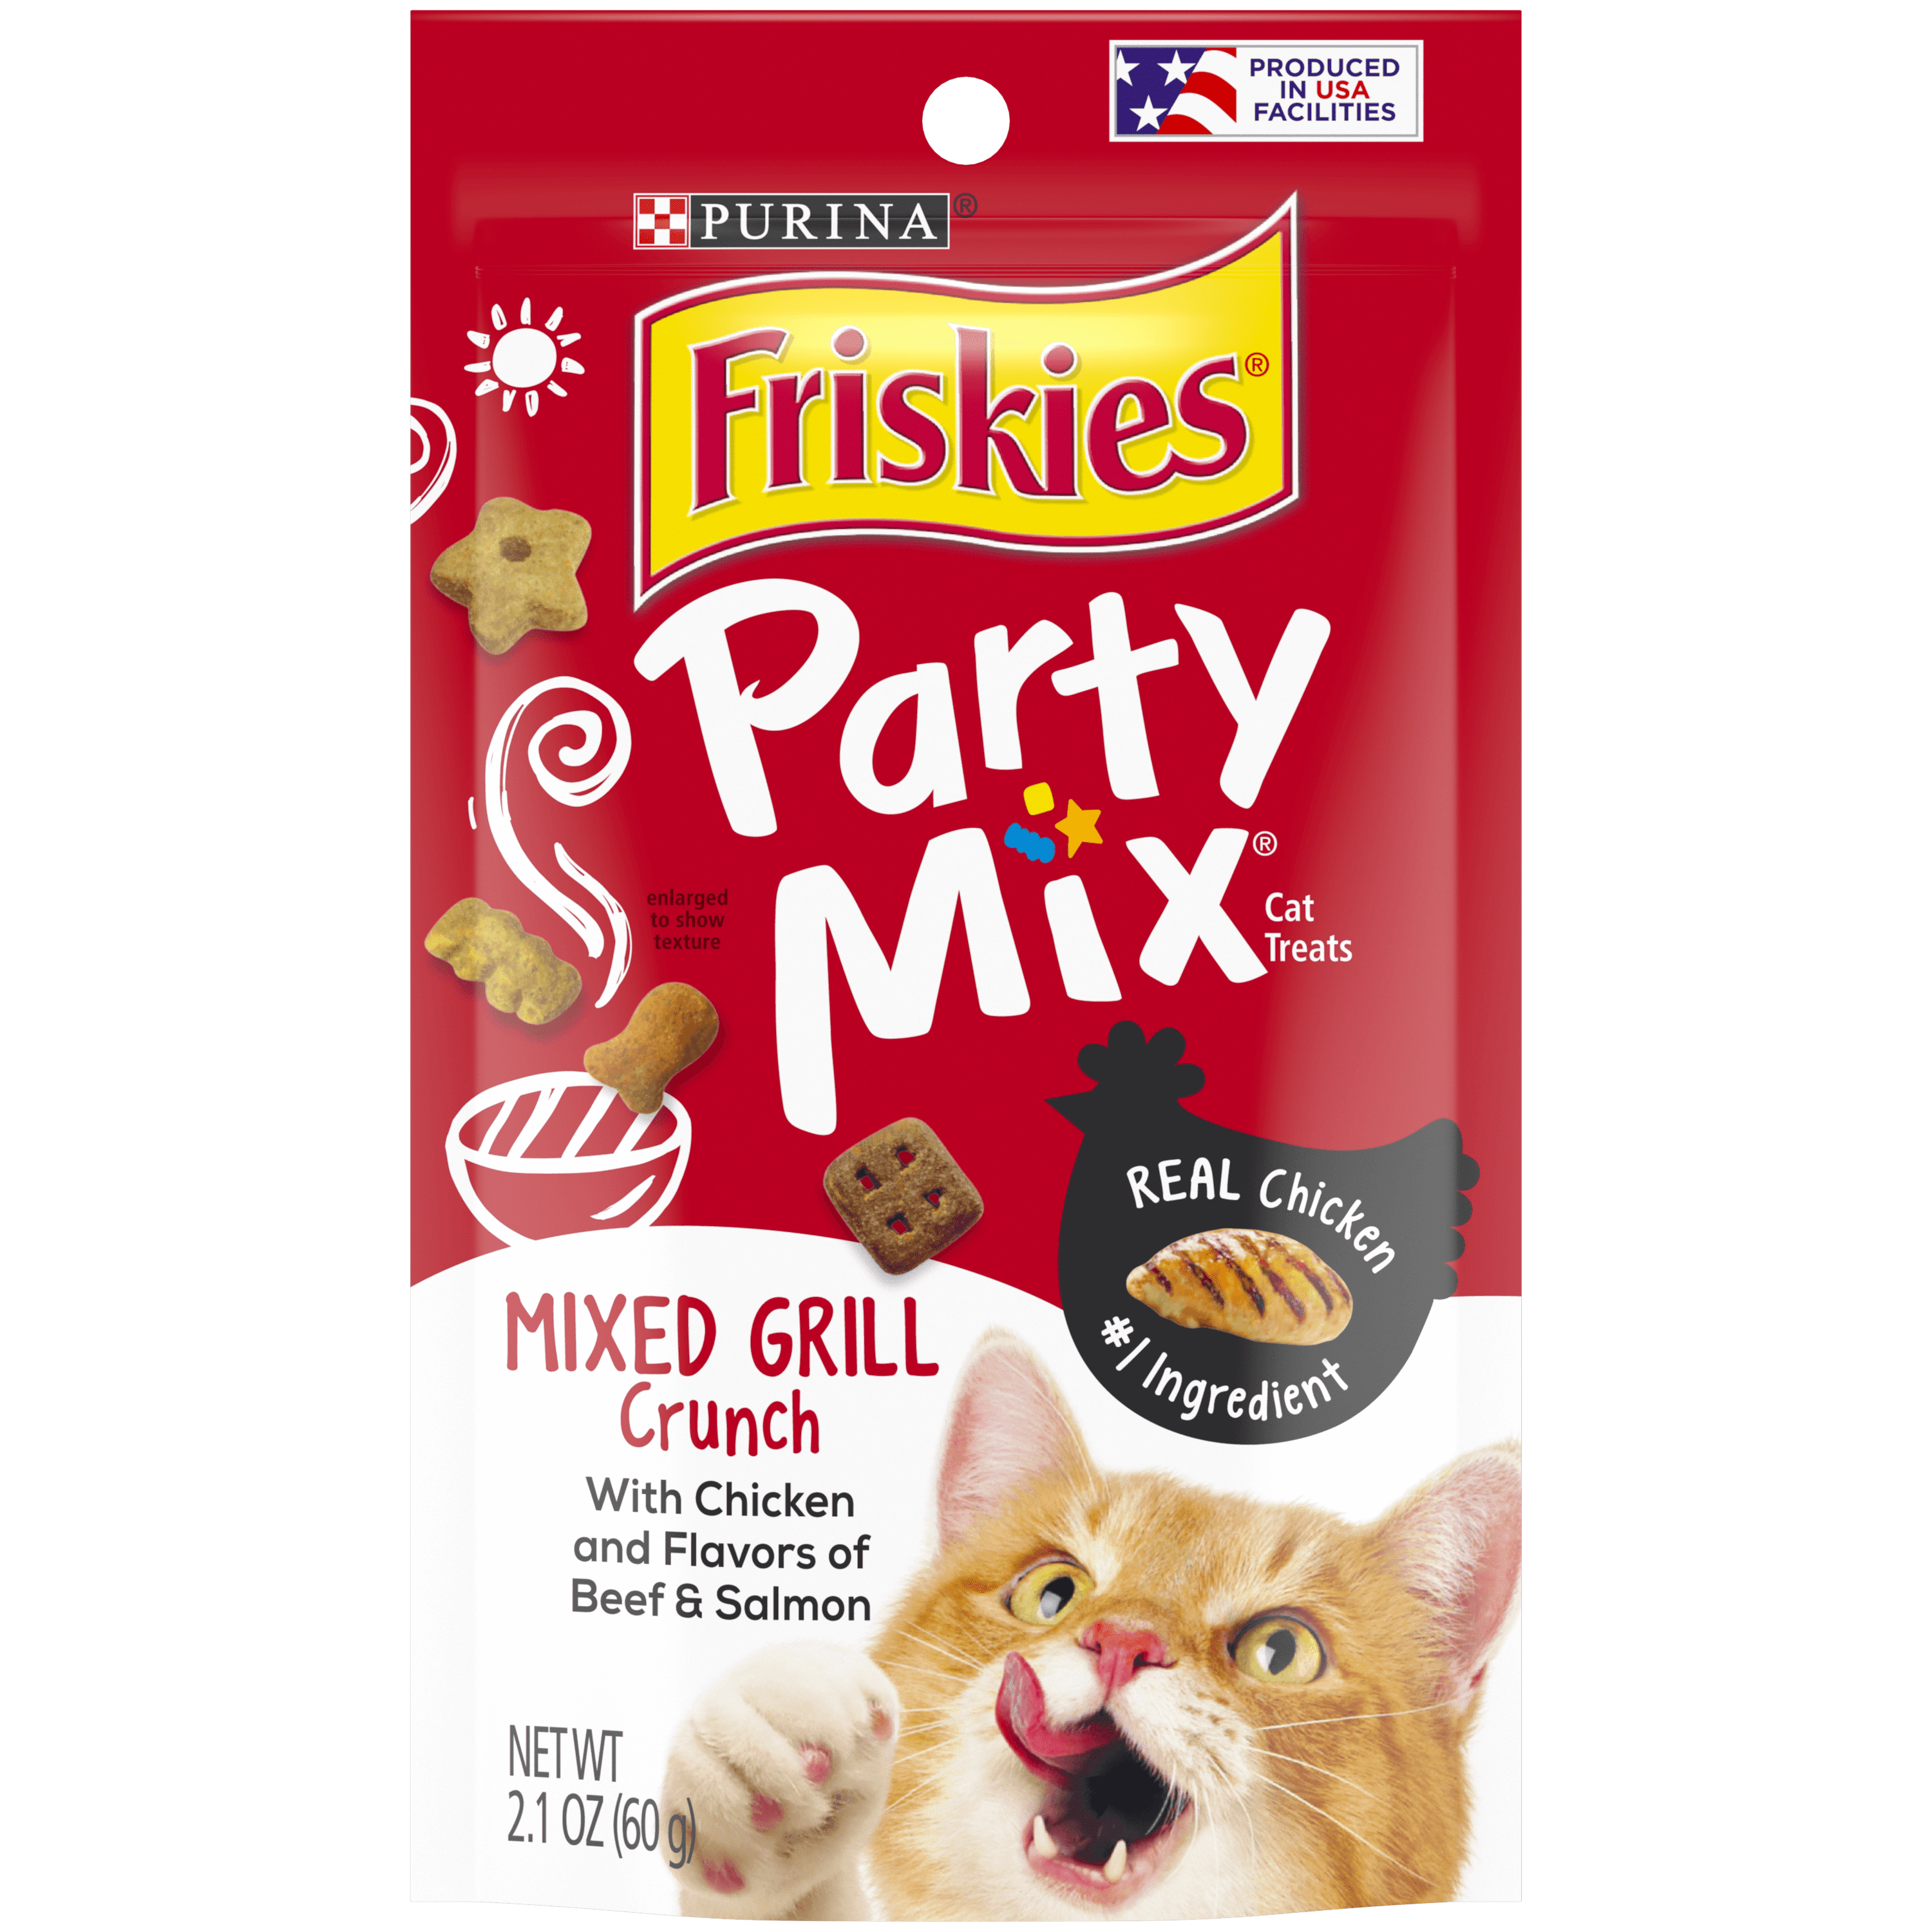 Friskies Cat Treats Party Mix Mixed Grill Crunch 2.1 oz. Pouch